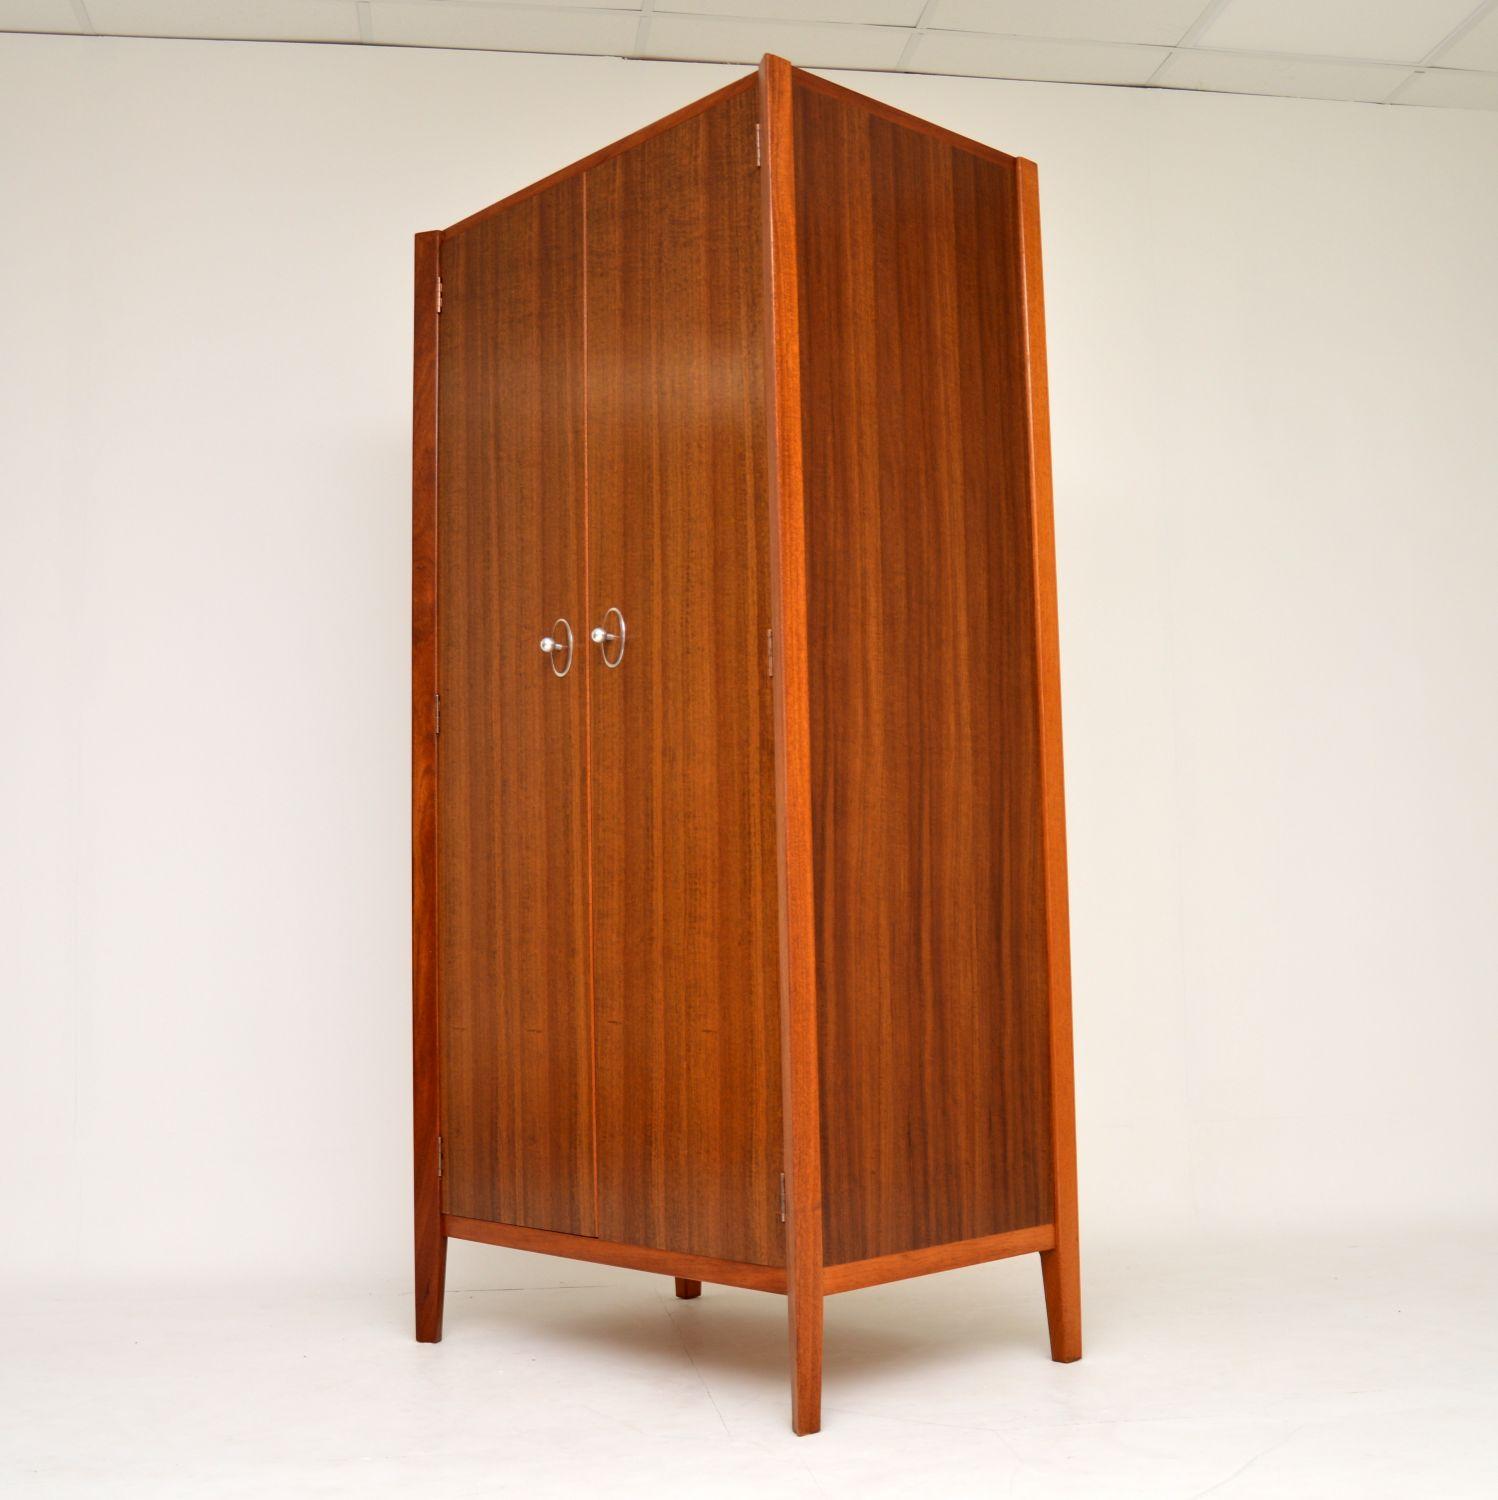 A beautifully designed and extremely well made vintage wardrobe in walnut, this was designed by John Herbert for Younger furniture, it dates from the 1960s. The quality is superb, we have had this completely stripped and re-polished to a very high